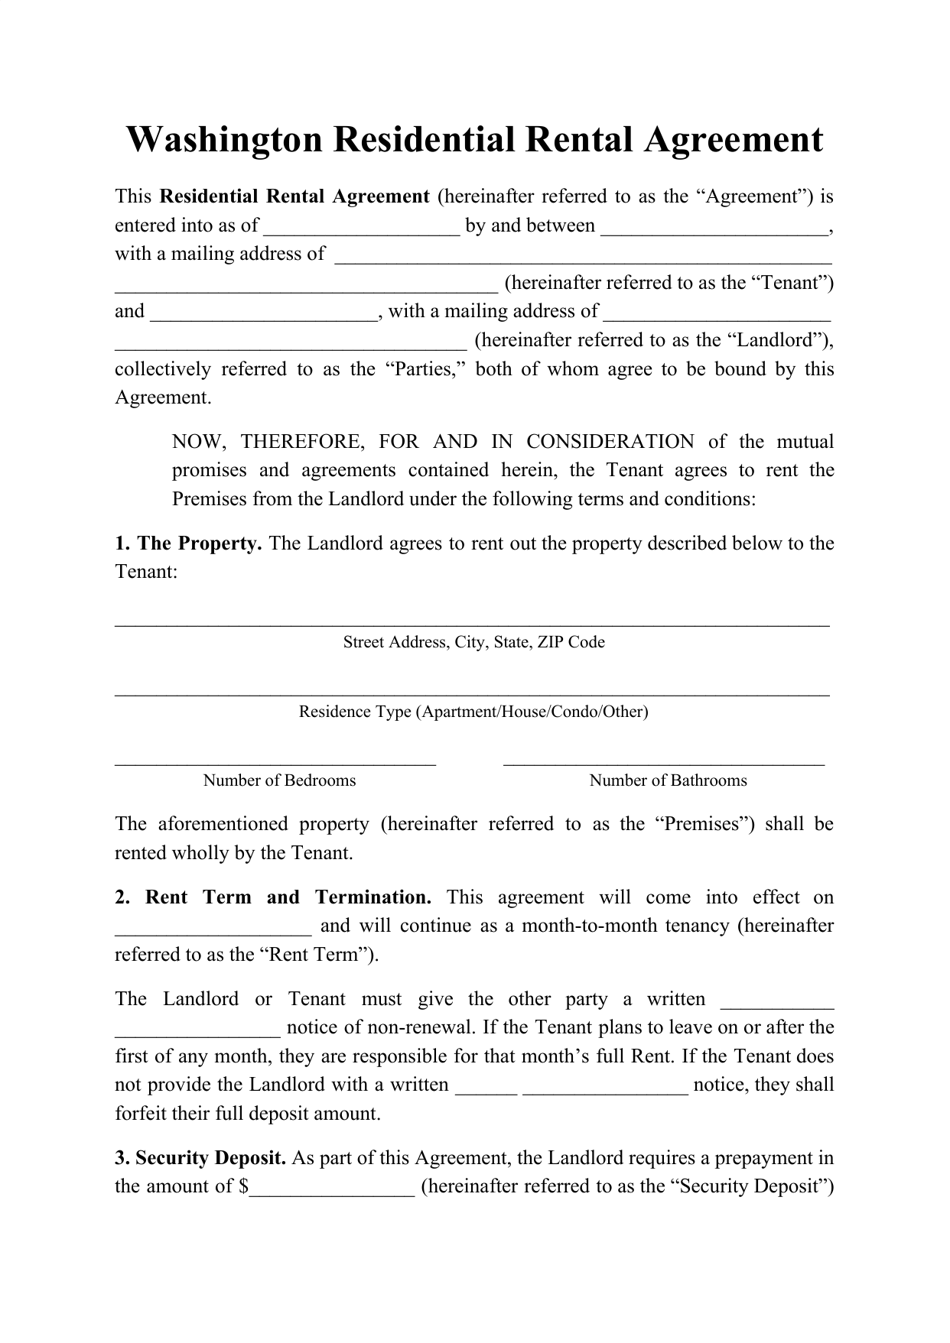 Residential Rental Agreement Template - Washington, Page 1